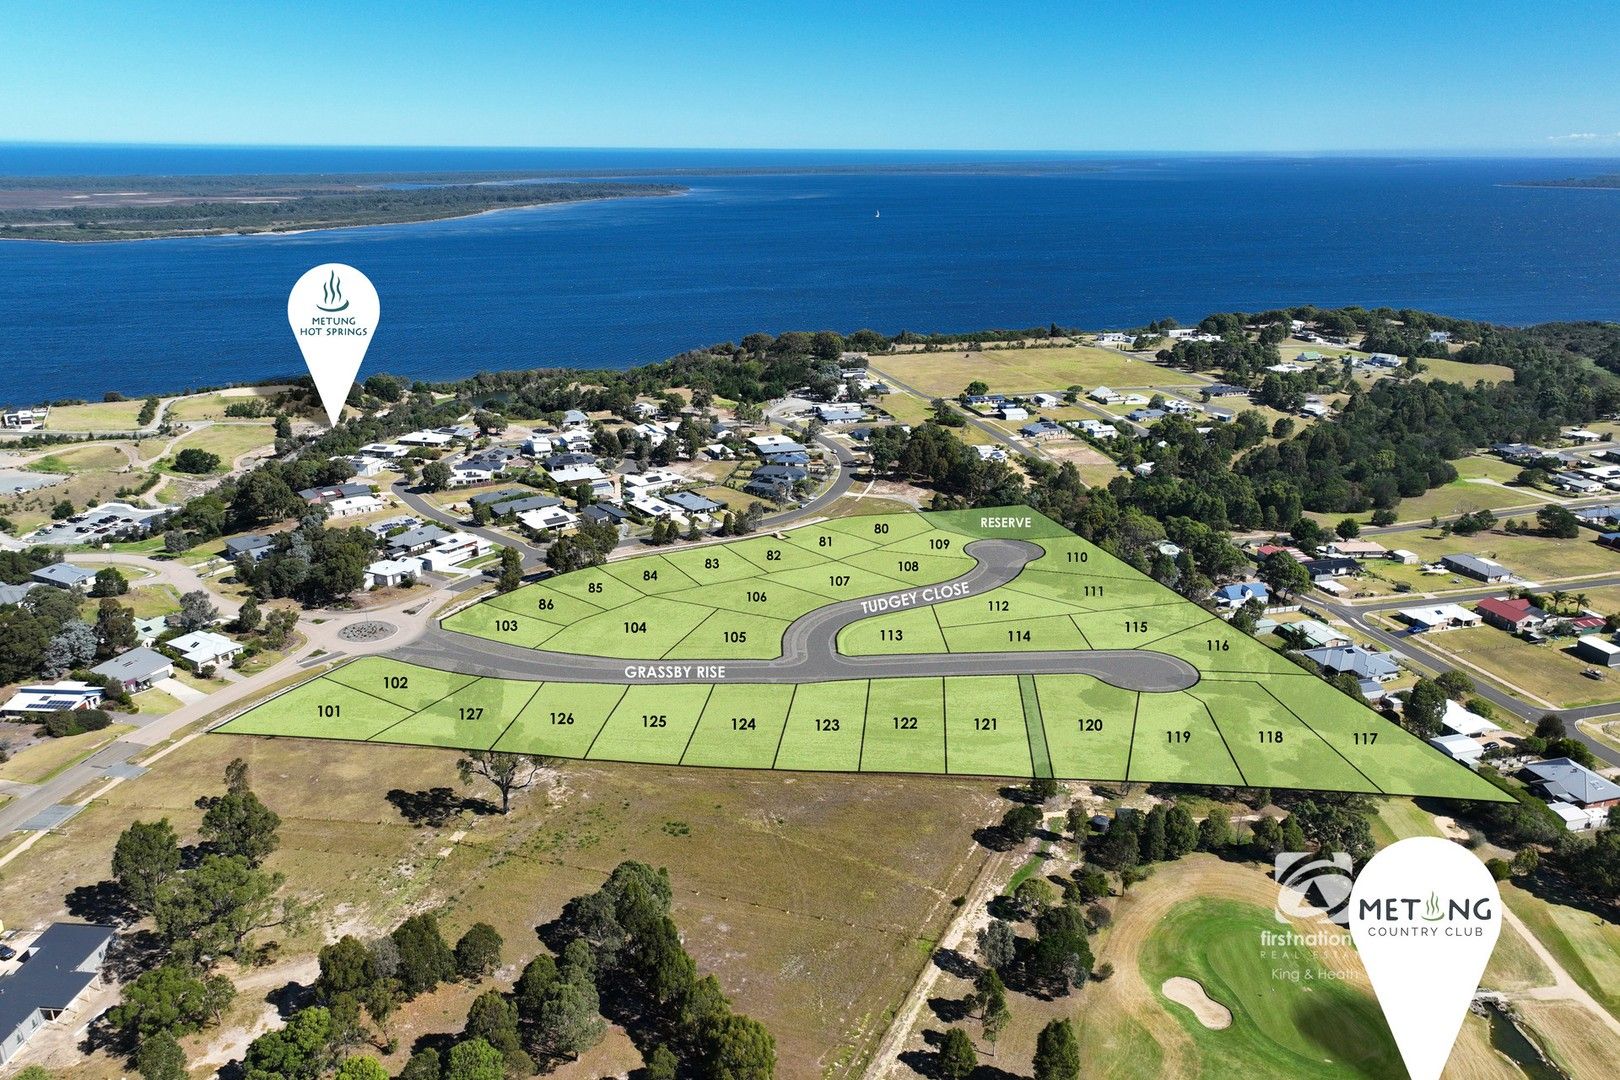 Lot 118 The Wedge, Metung VIC 3904, Image 1